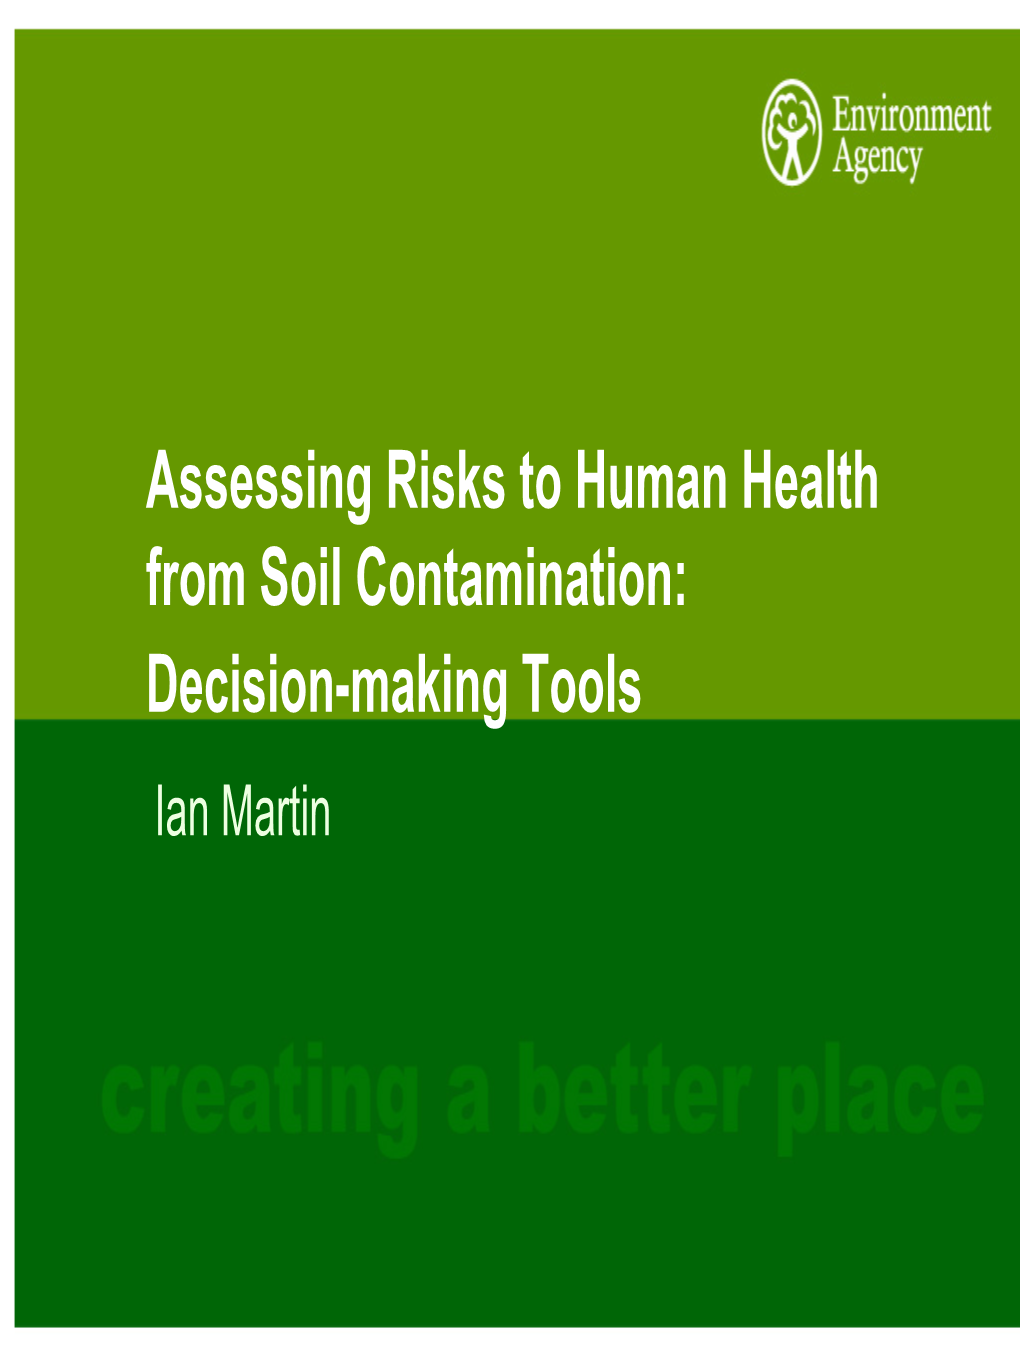 Assessing Risks to Human Health from Soil Contamination: Decision-Making Tools Ian Martin in the Next 45 Minutes